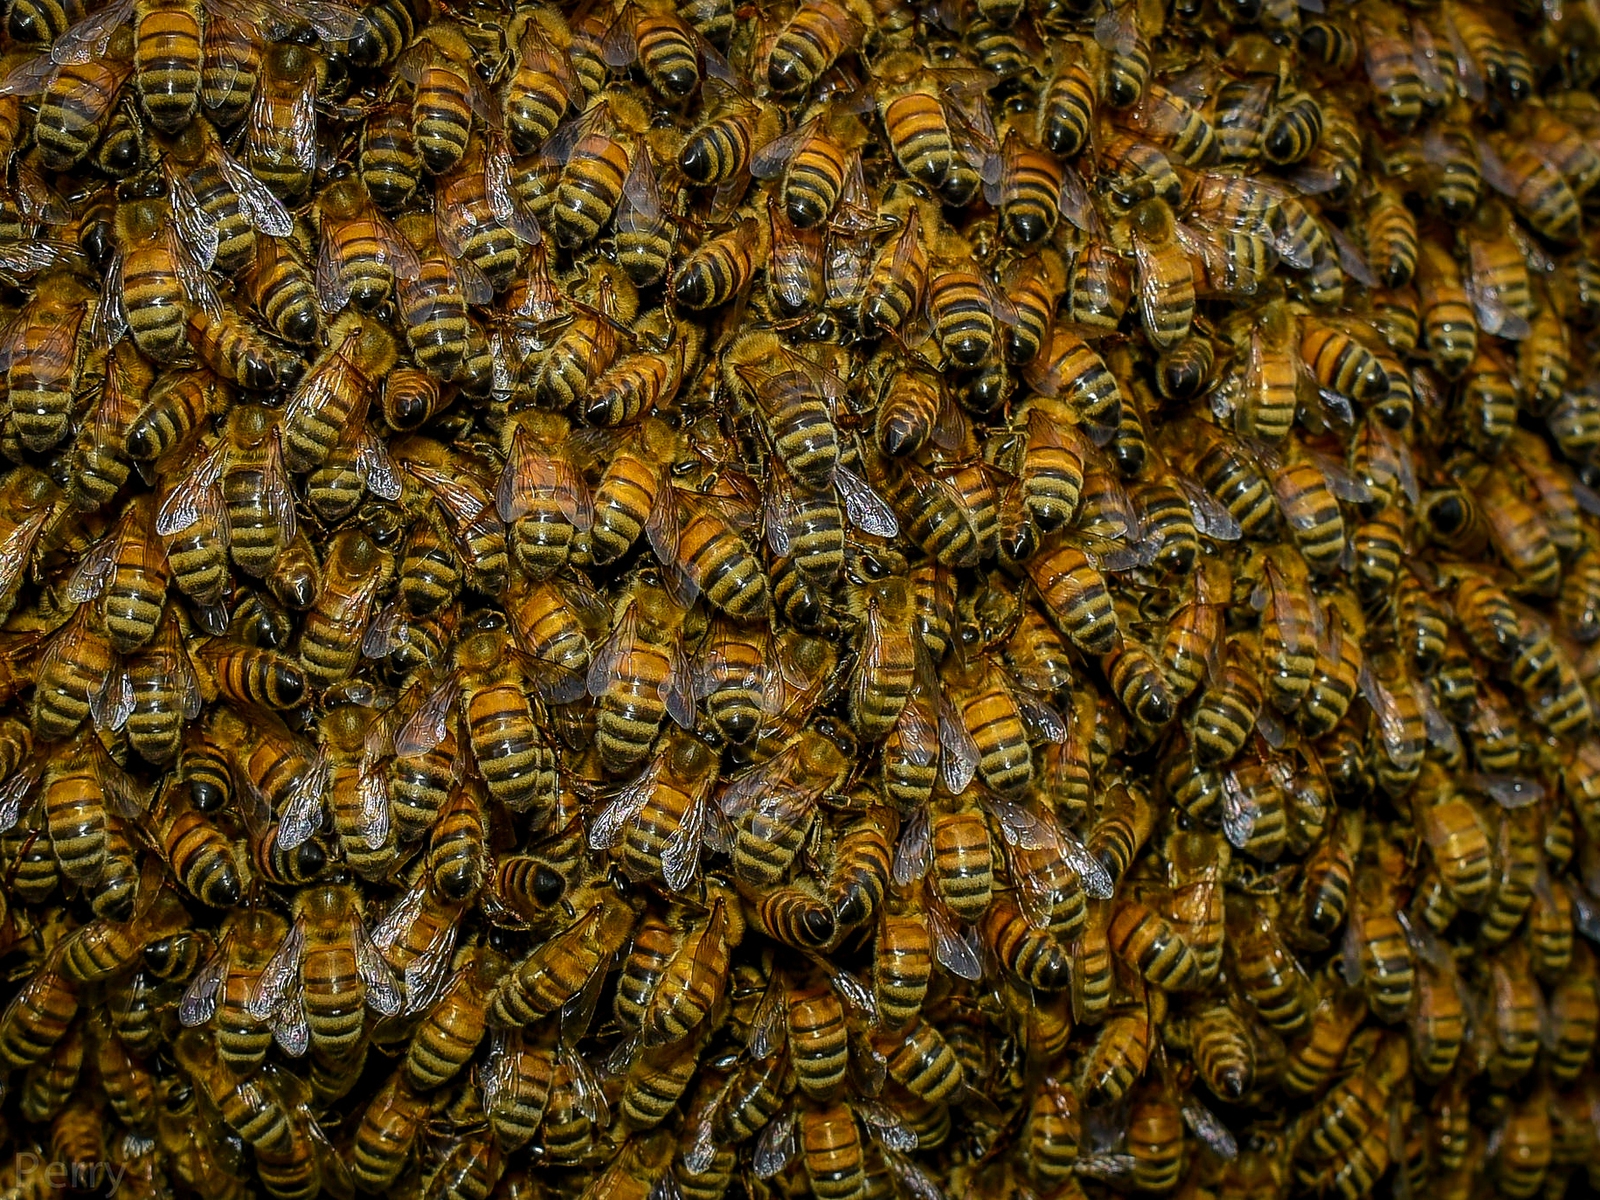 Swarm of Bees for 1600 x 1200 resolution